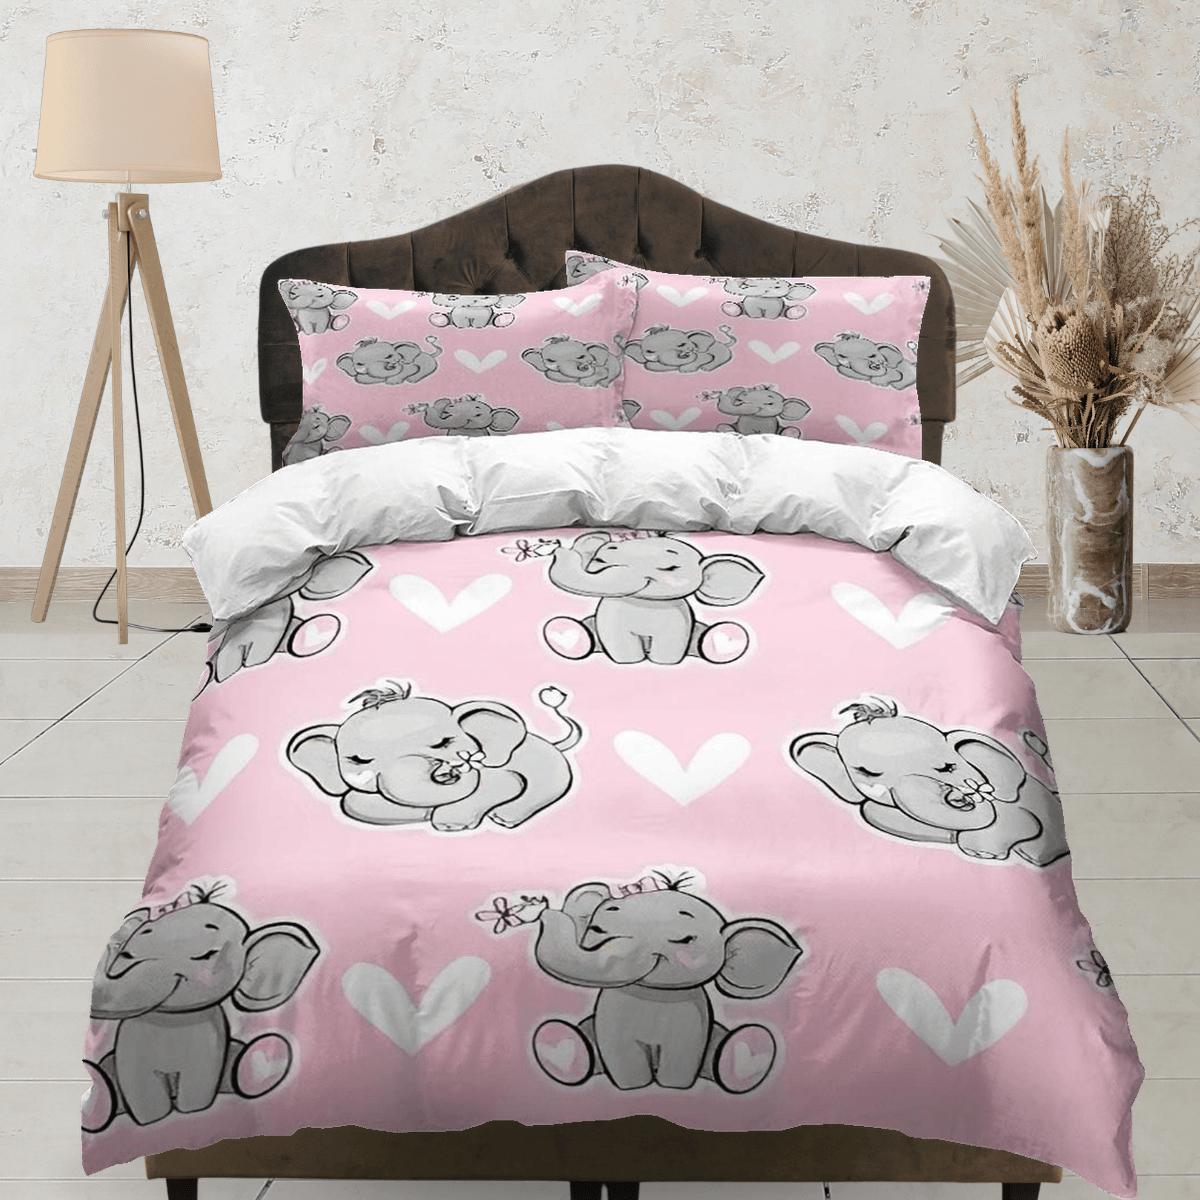 daintyduvet Elephant with hearts baby pink bedding cute duvet cover set, kids bedding full, nursery bed decor, elephant baby shower, toddler bedding